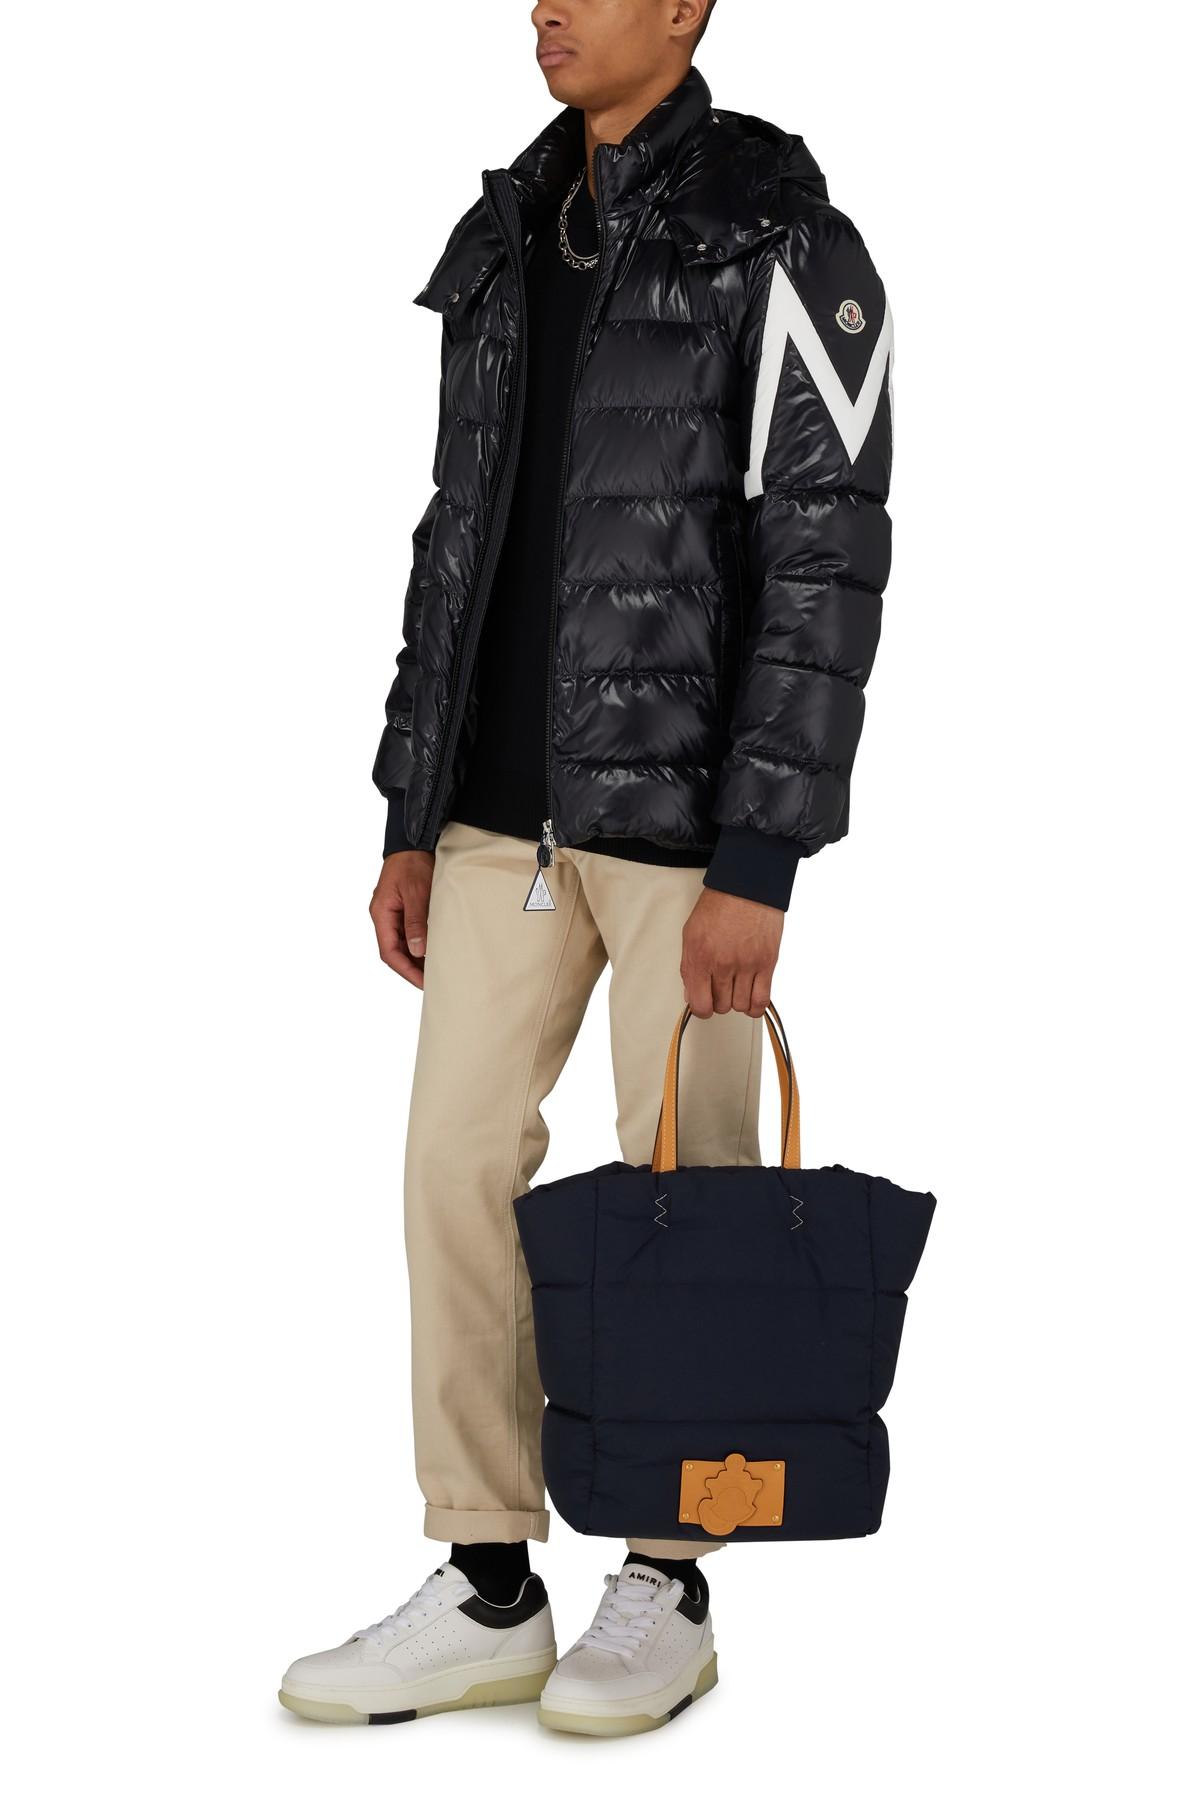 Moncler Genius Synthetic 1 Moncler Jw Anderson - Tote Bag in Navy 